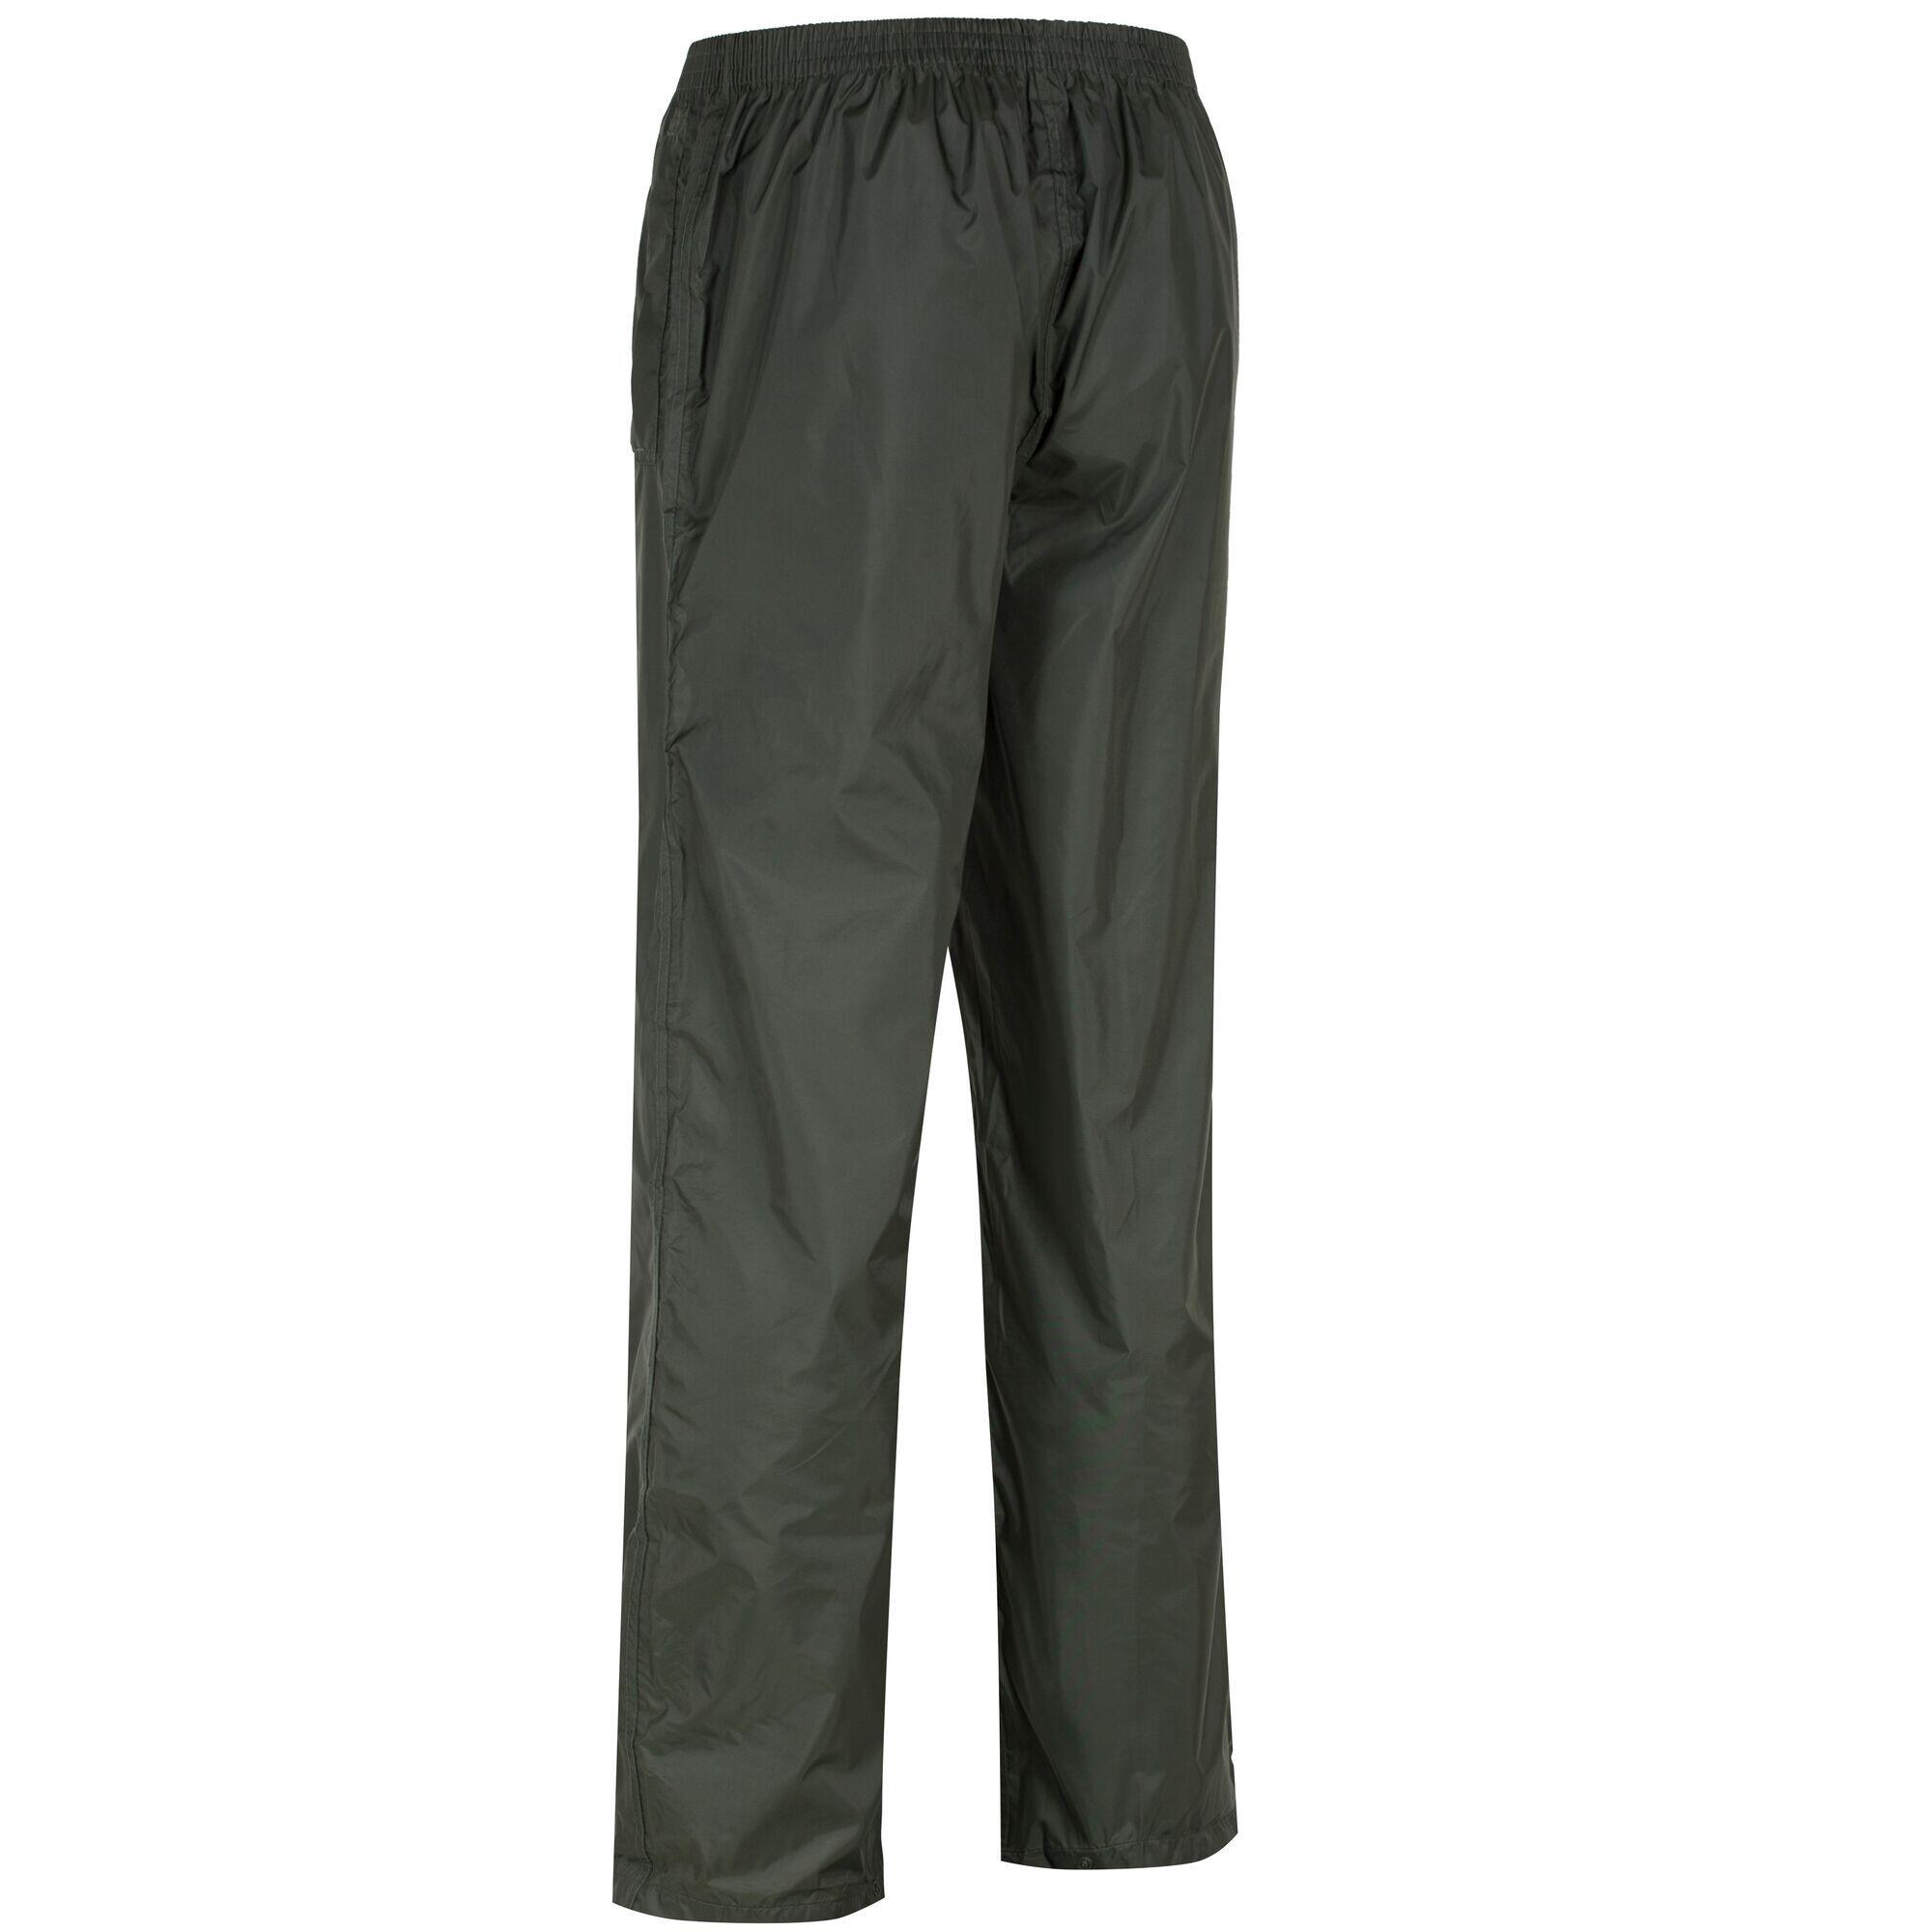 Pack-It Men's Hiking Overtrousers 6/7